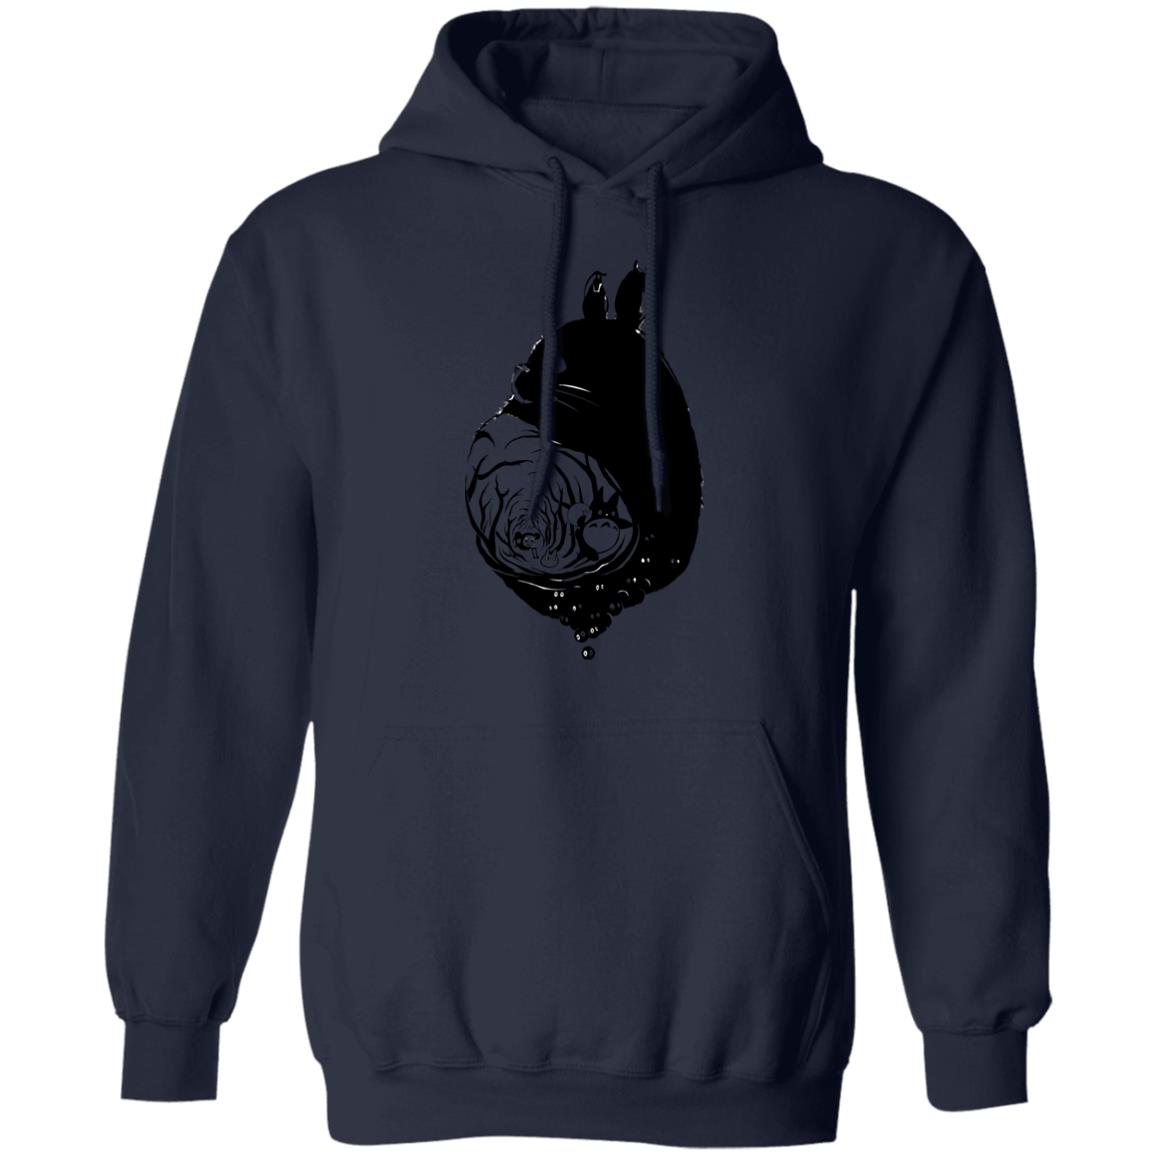 My Neighbor Totoro – Into the Forest Hoodie Unisex